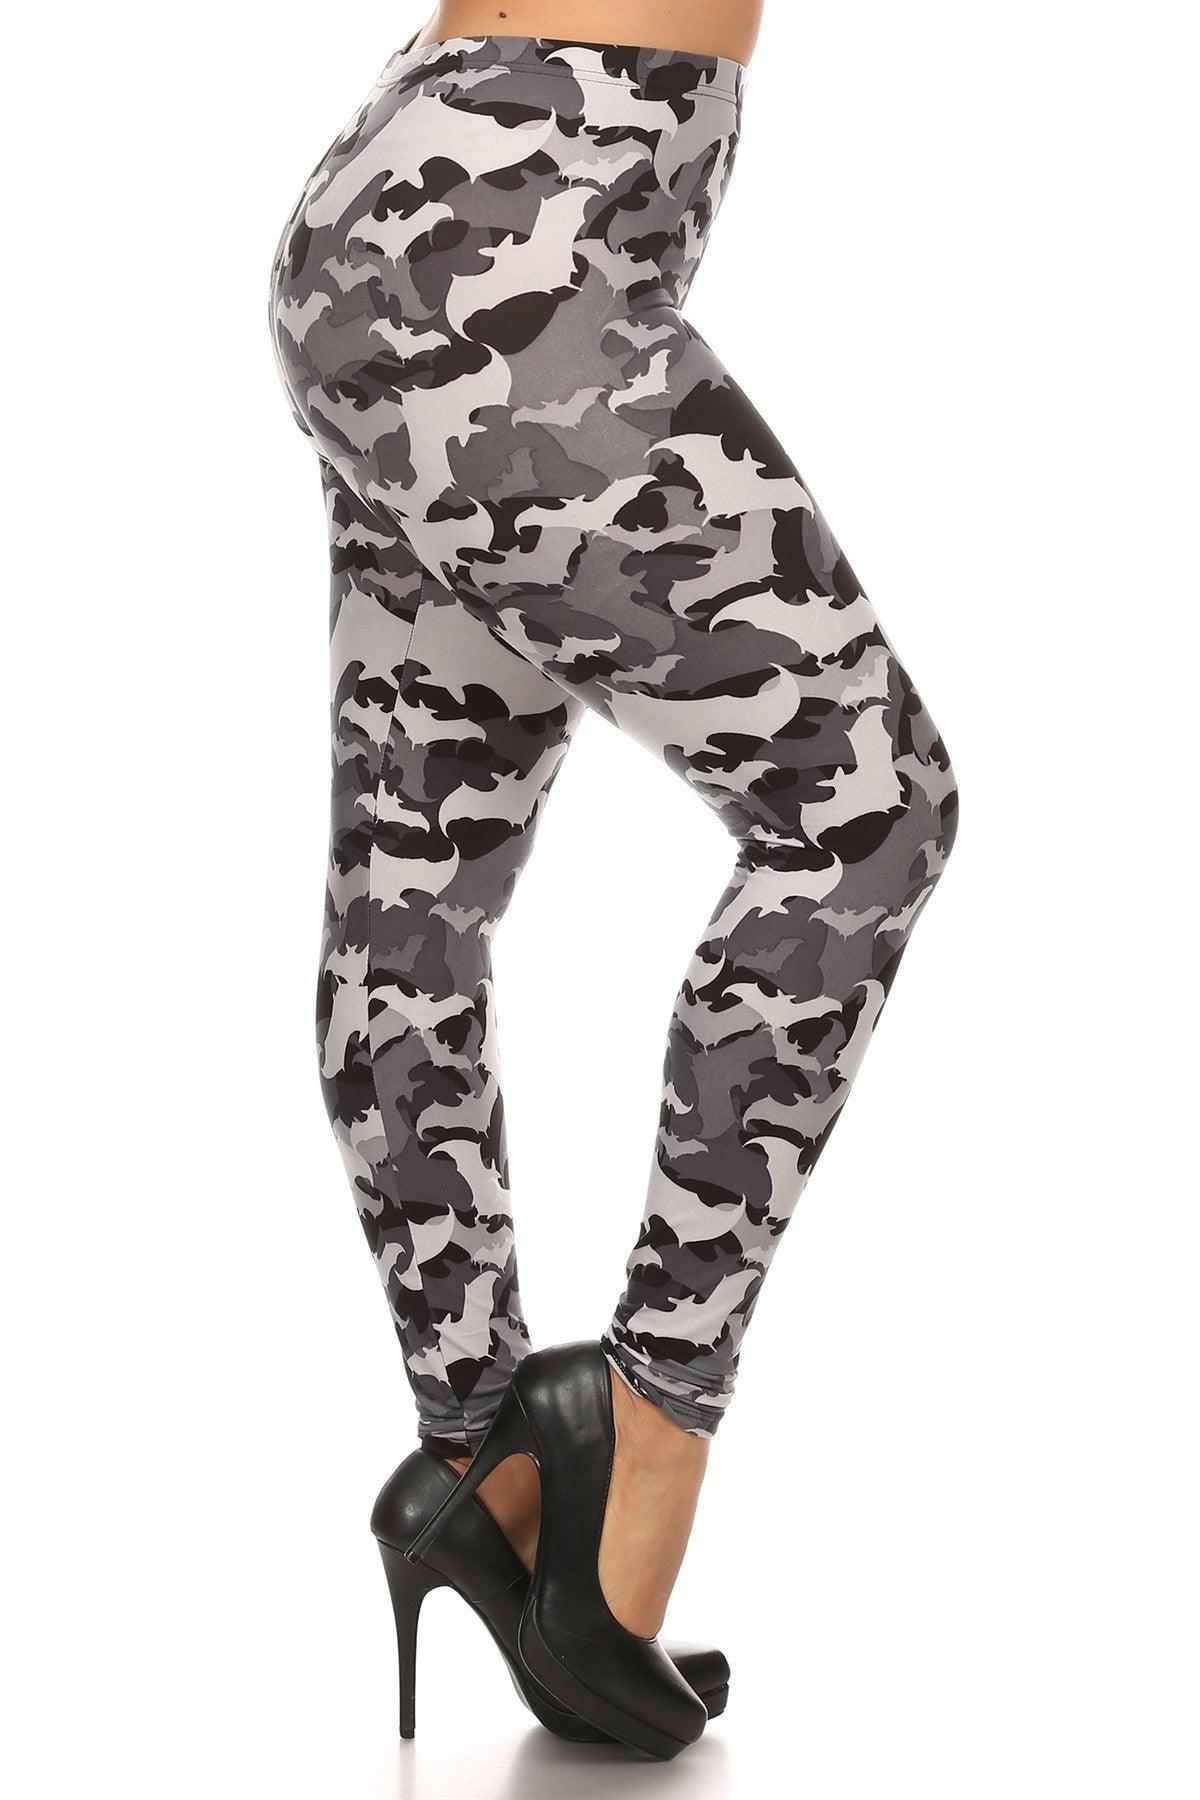 Plus Size Print, Full Length Leggings In A Slim Fitting Style With A Banded High Waist. - Kreative Passions